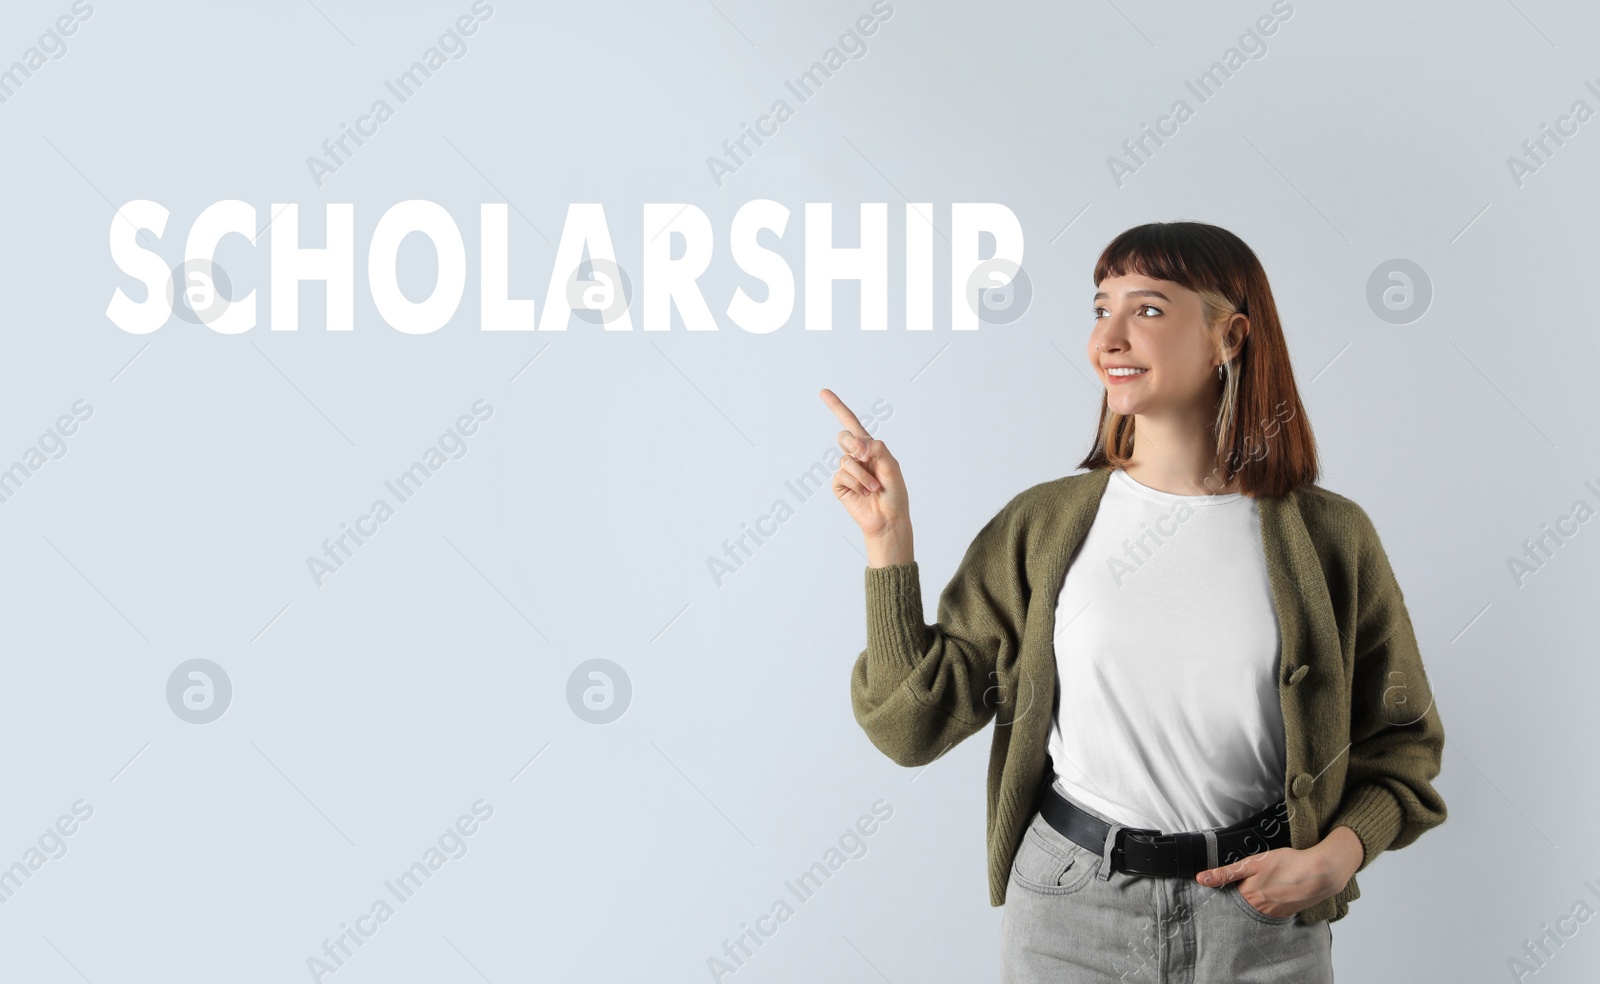 Image of Scholarship concept. Portrait of happy student on light background